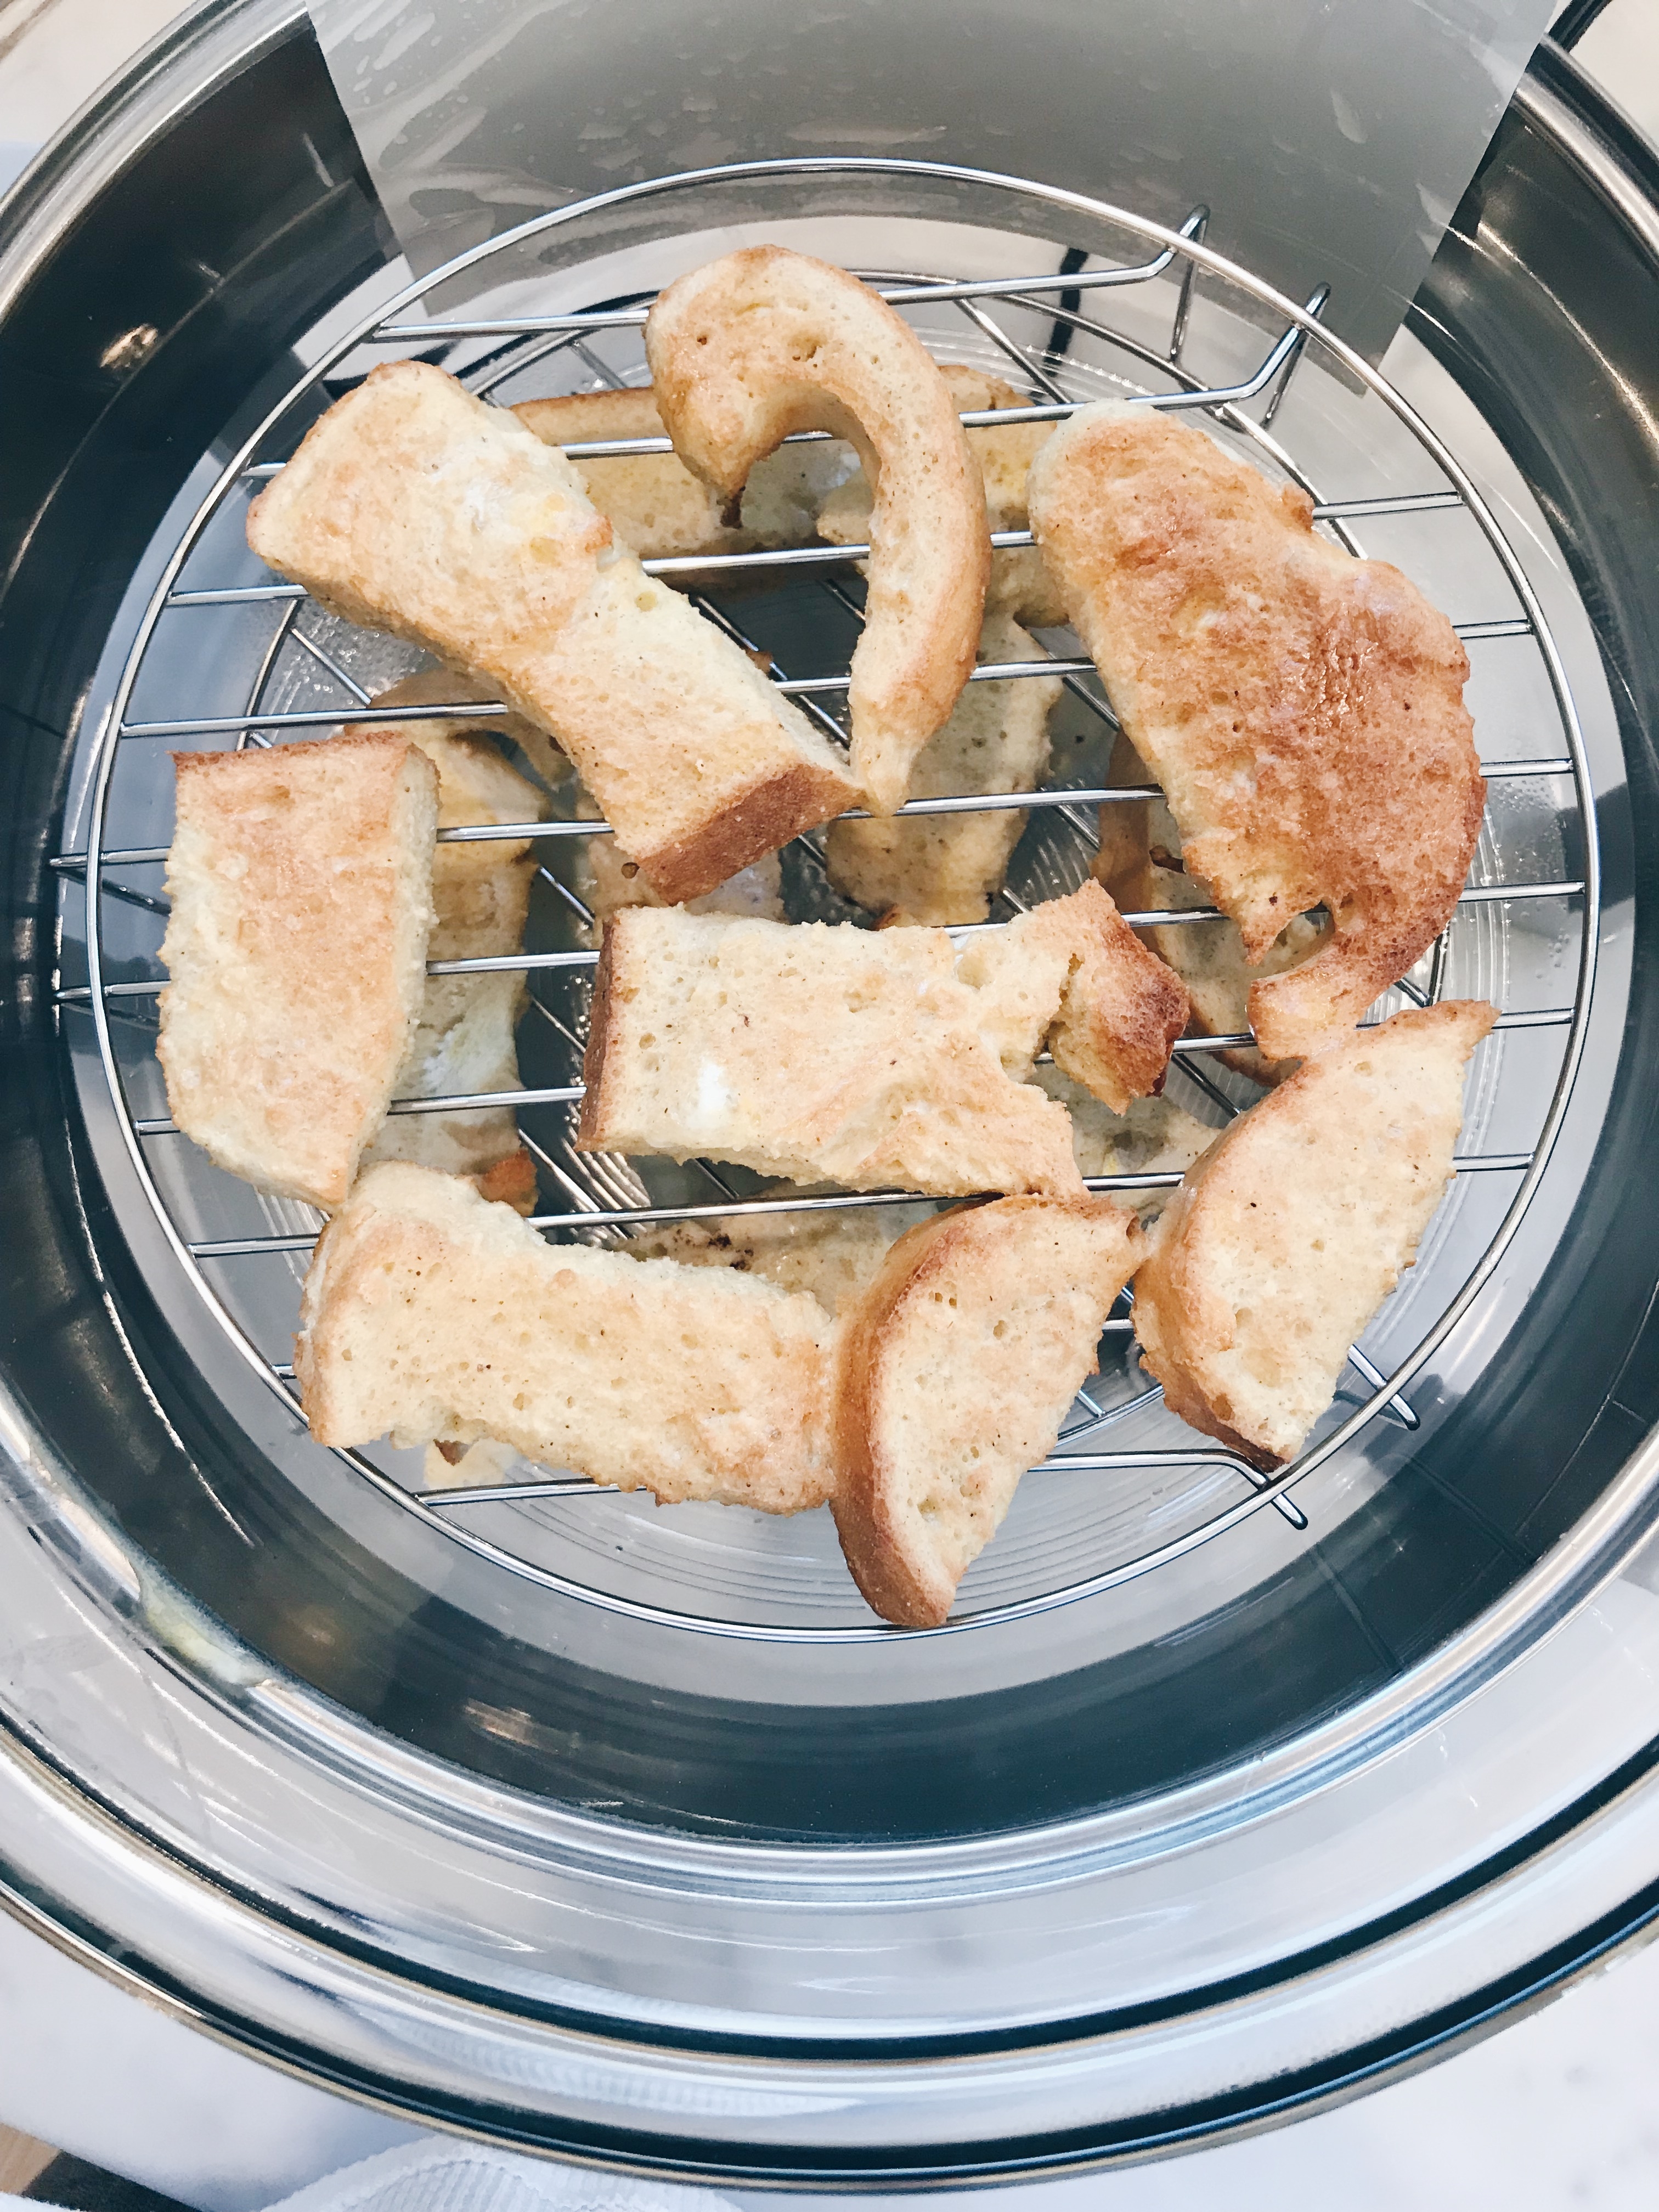 easy breakfast ideas for kids - french toast sticks in the air fryer on pinteresting plans lifestyle blog